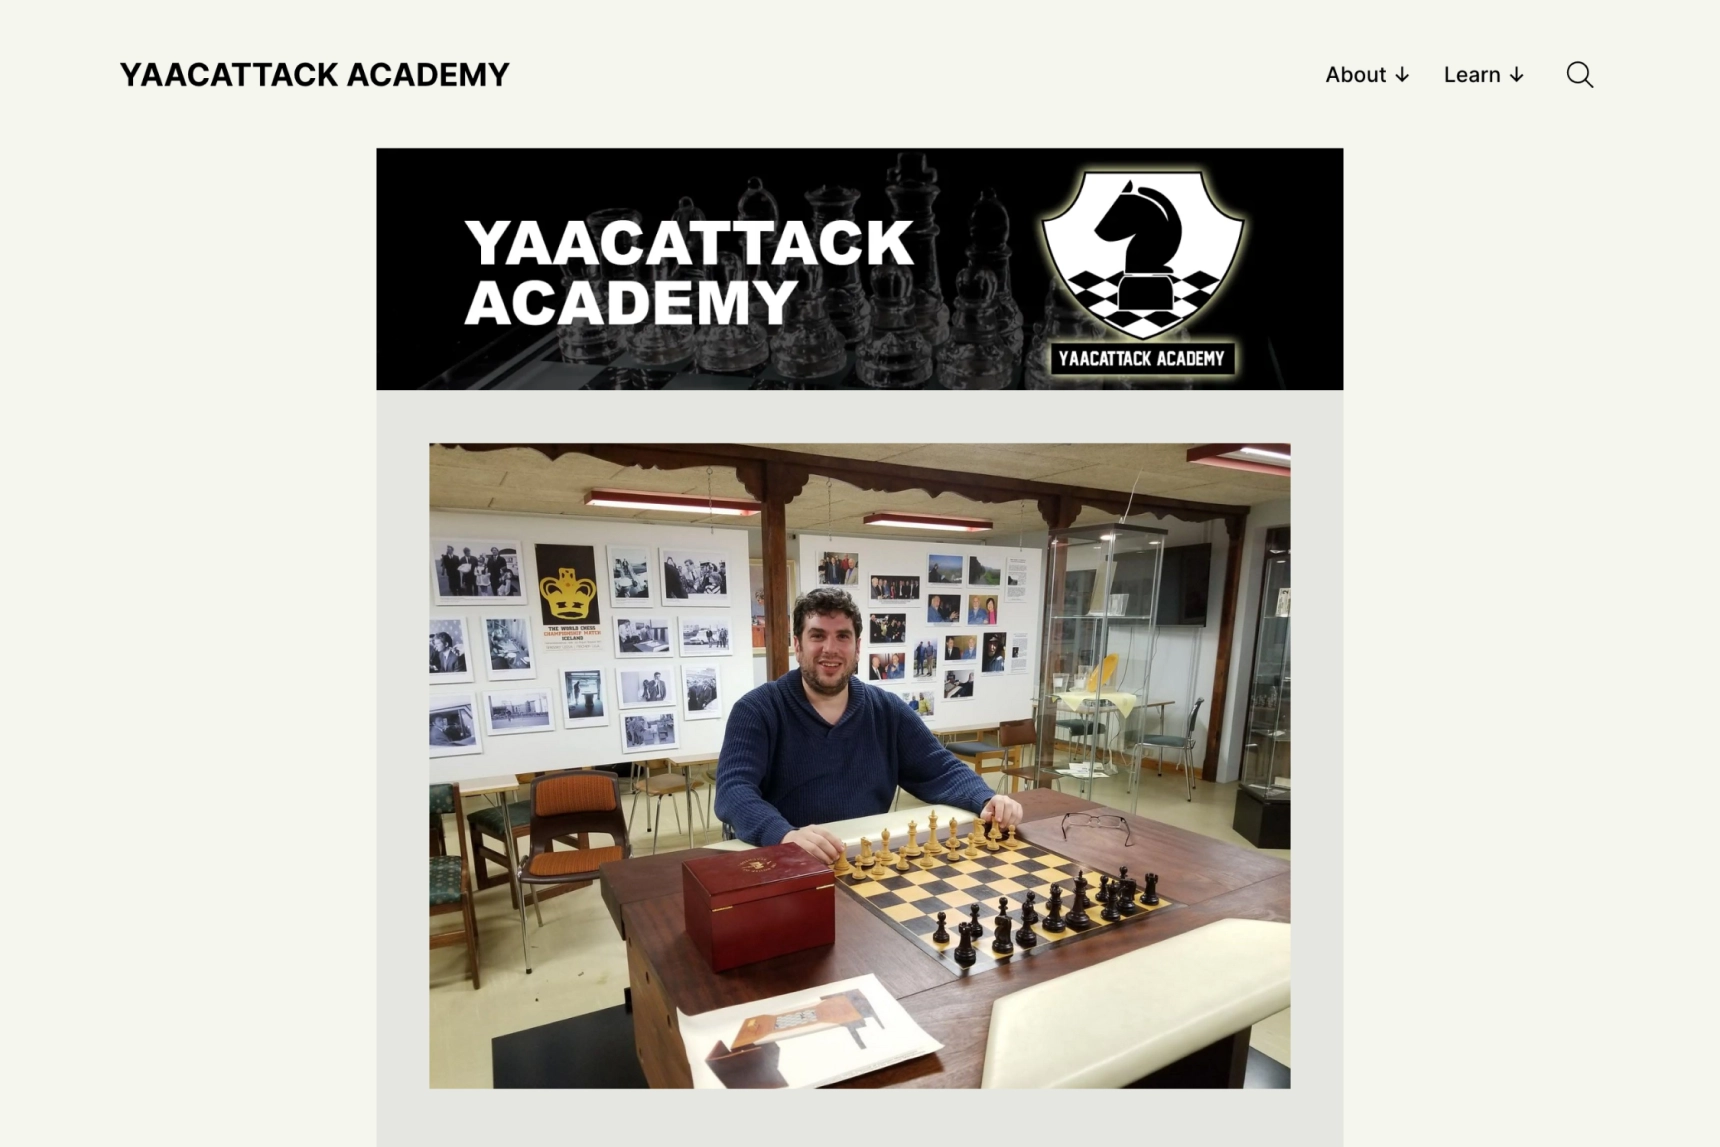 YAACATTACK ACADEMY